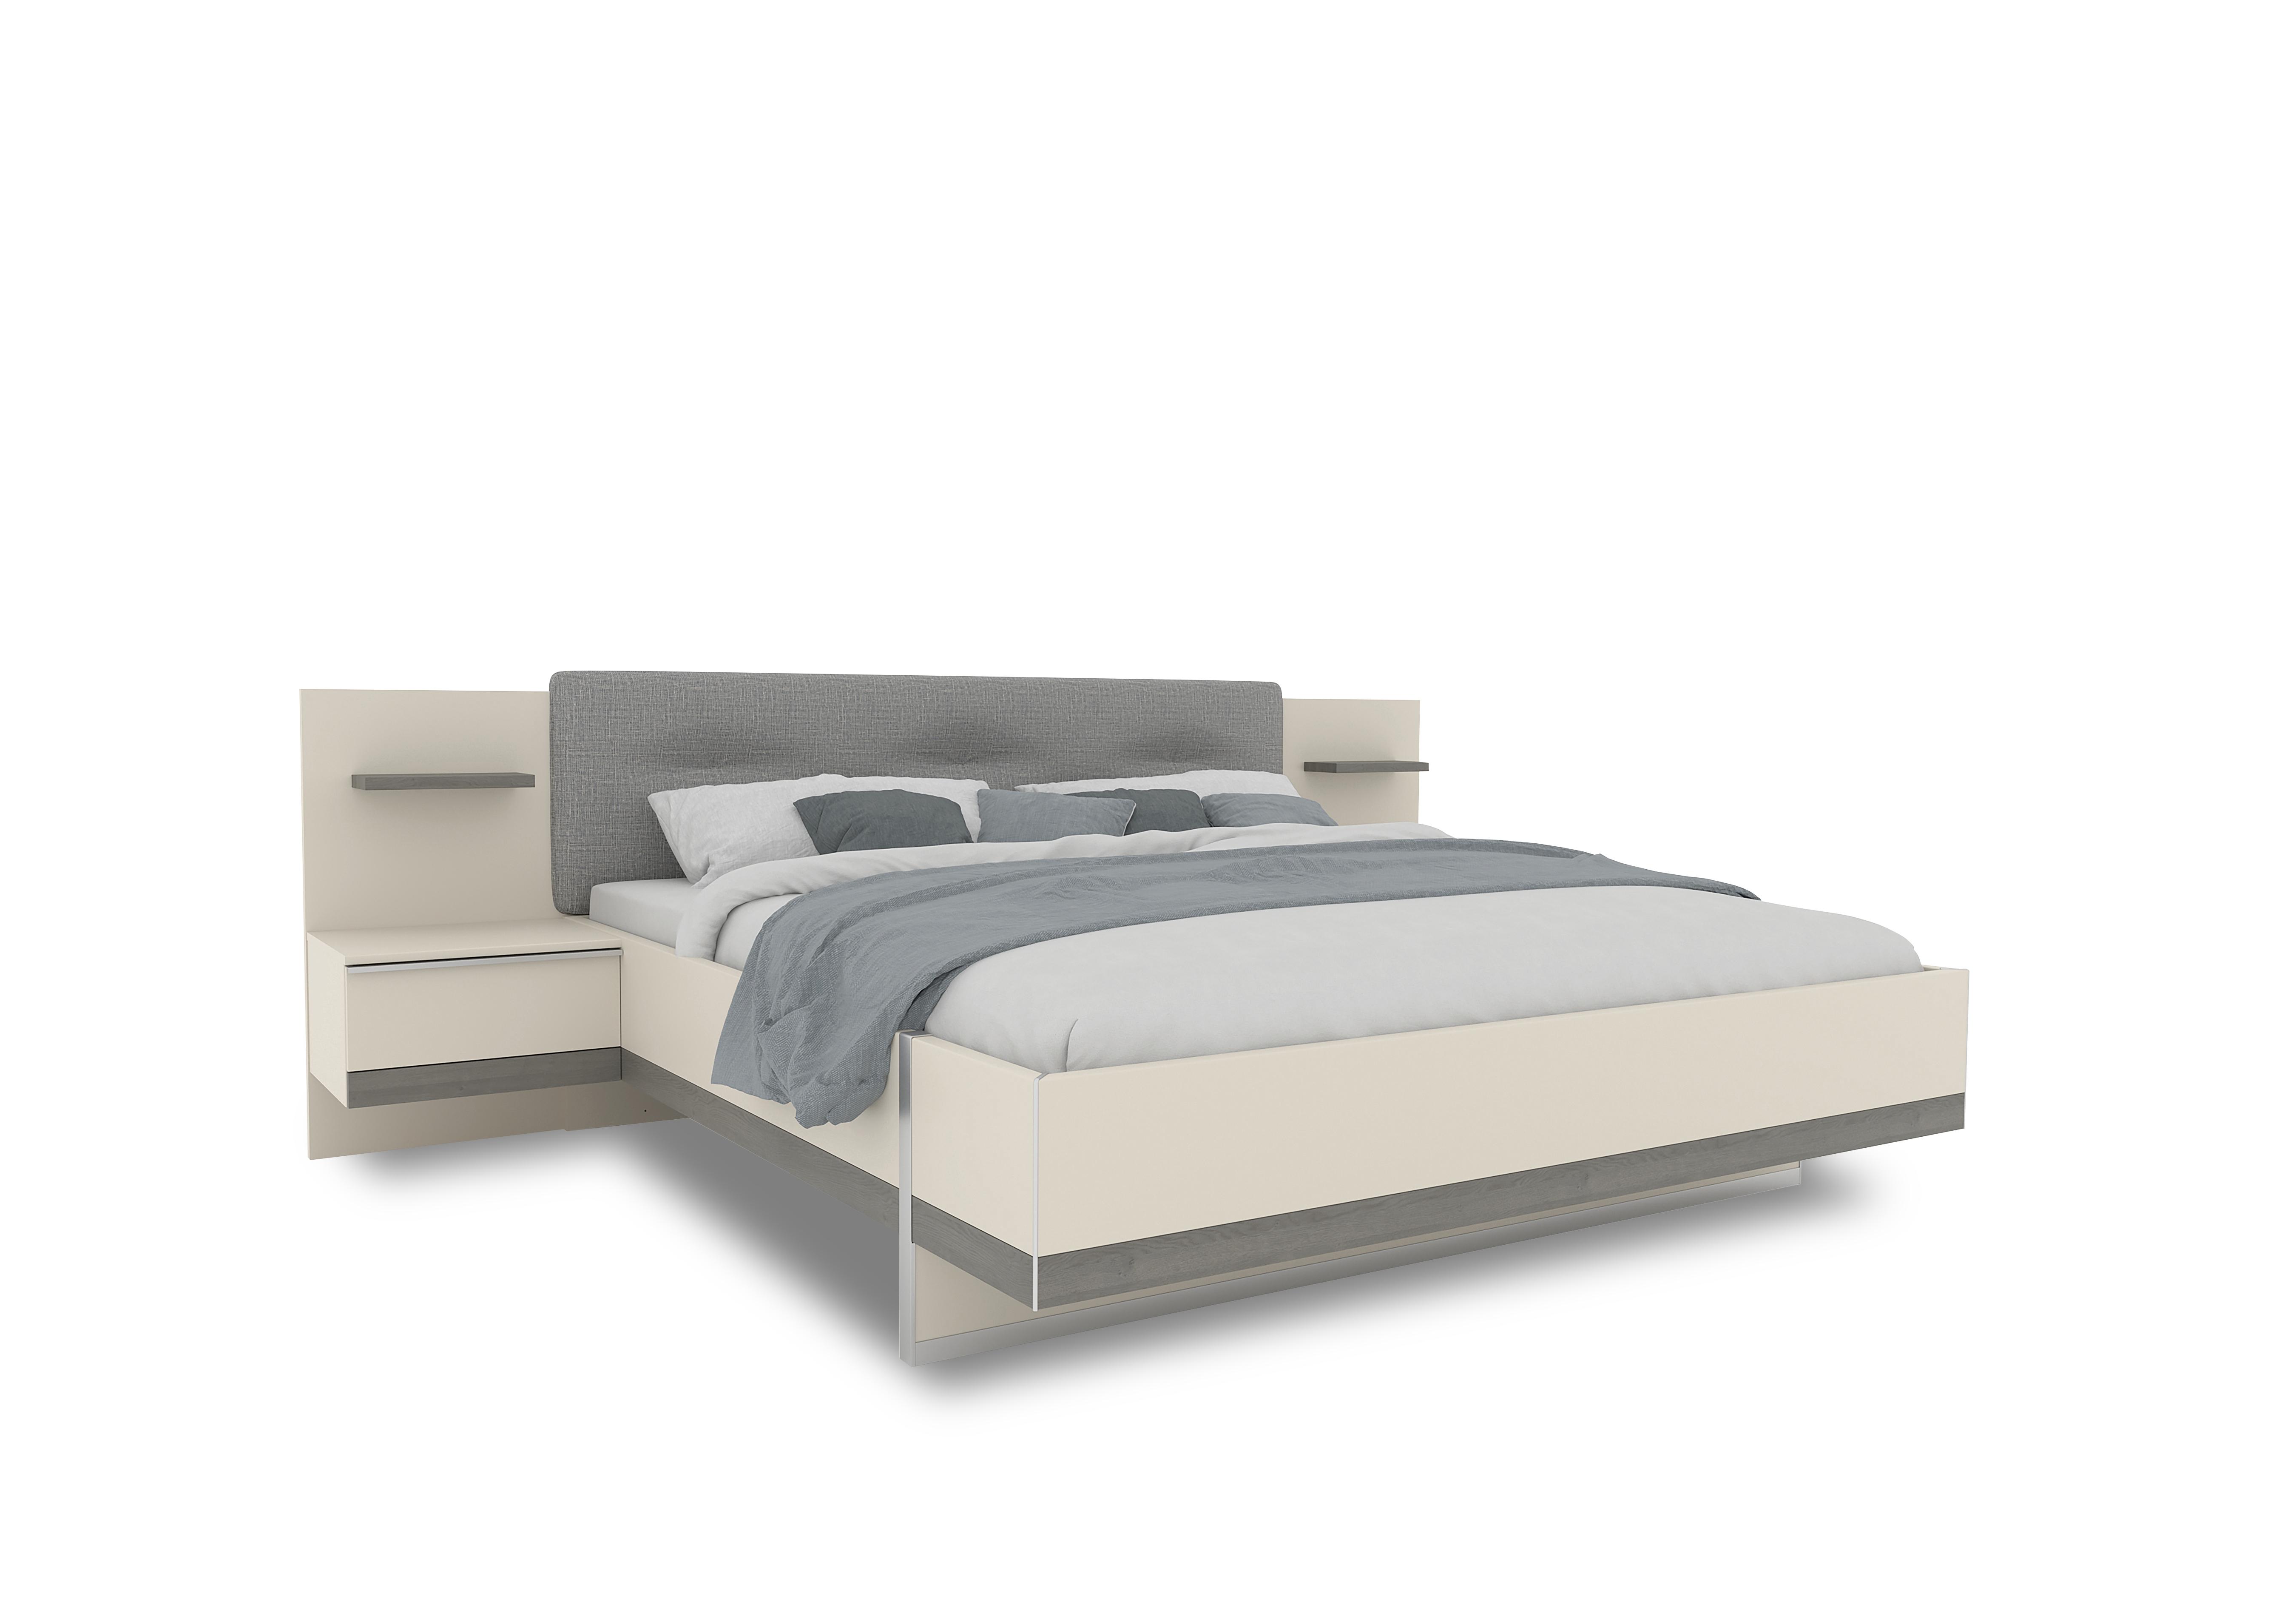 Cora Bed Frame in Perla With Slv/Gry Contrast on Furniture Village